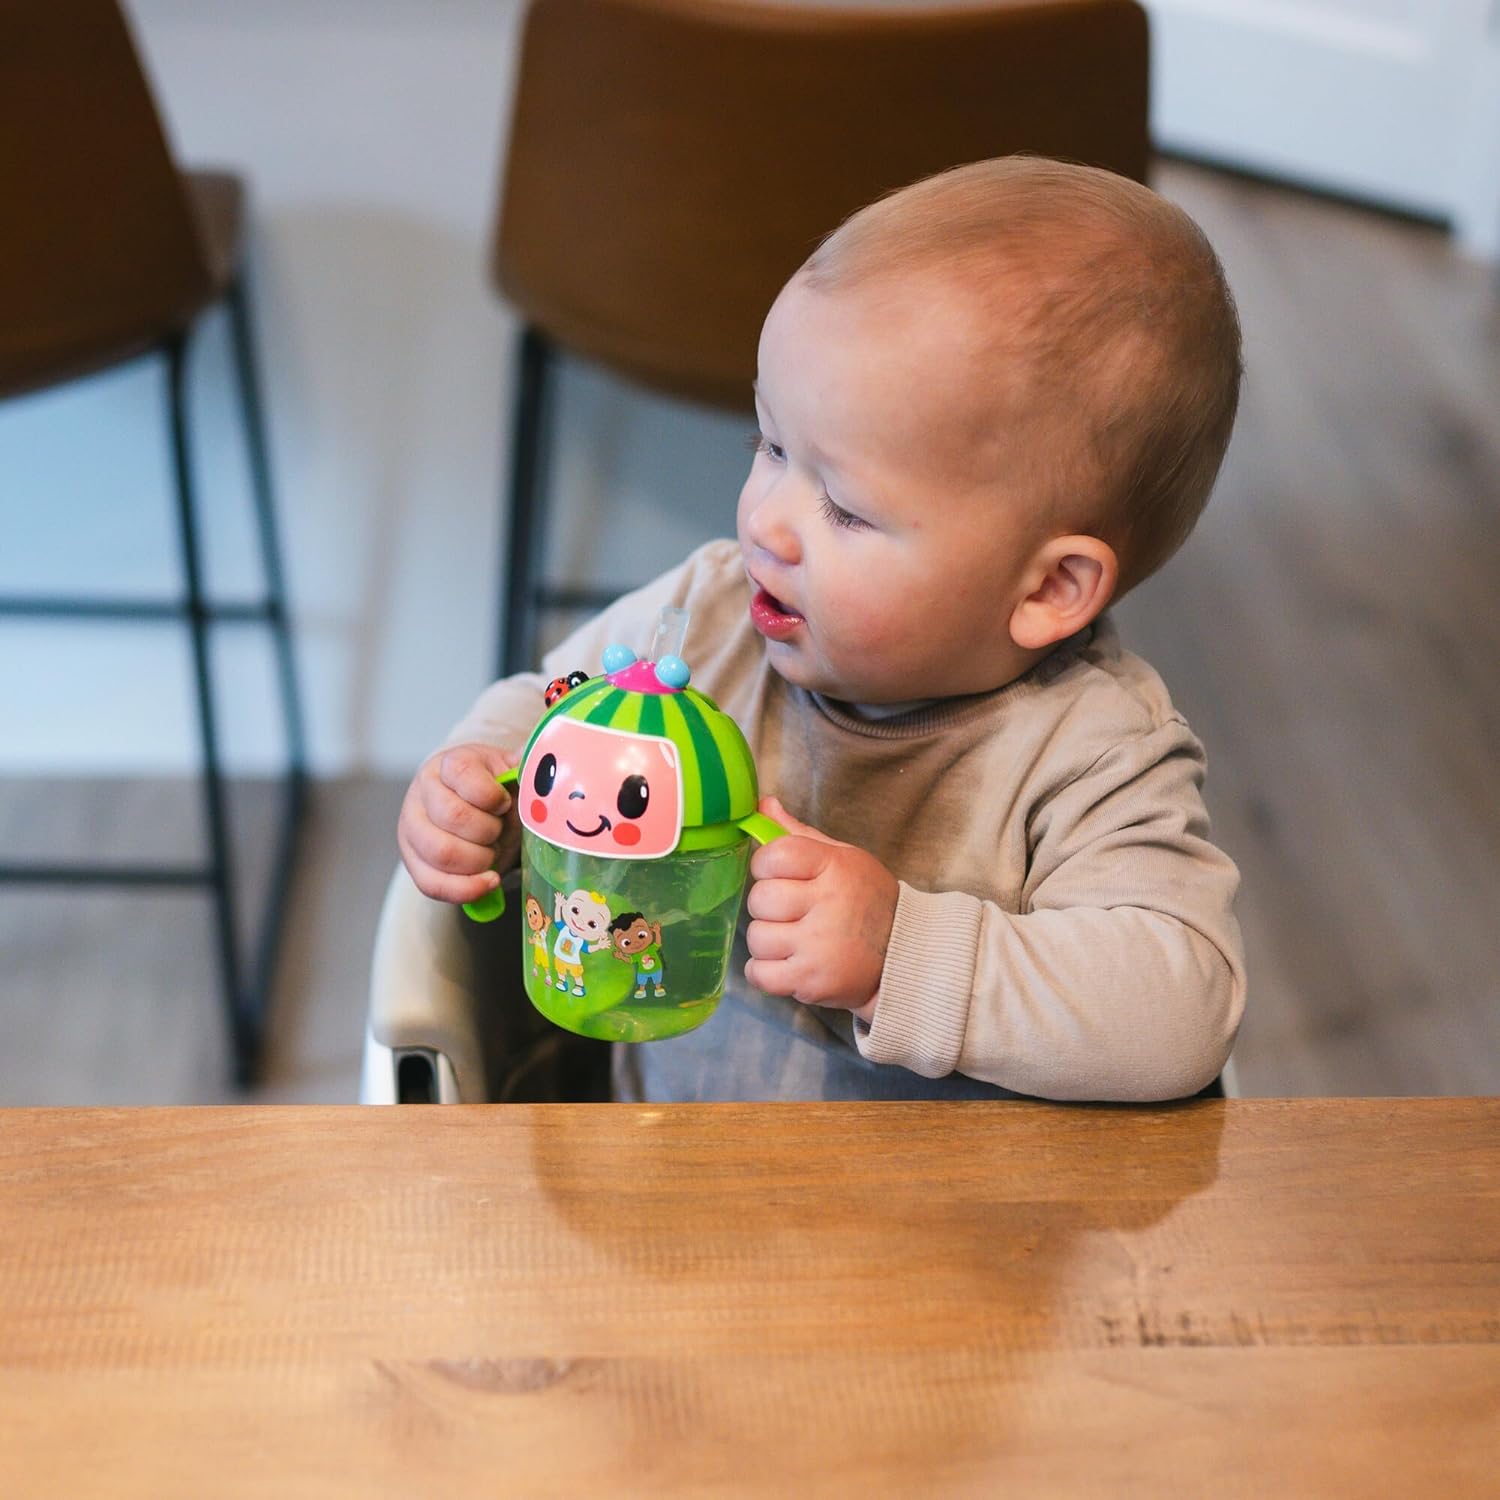 The First Years Cocomelon Weighted Straw Cup - Spill Proof Toddler Straw Cups with Flip Top Cover - Transition Sippy Cups - Toddler Feeding Supplies - 7 Oz - Ages 6 Months and Up